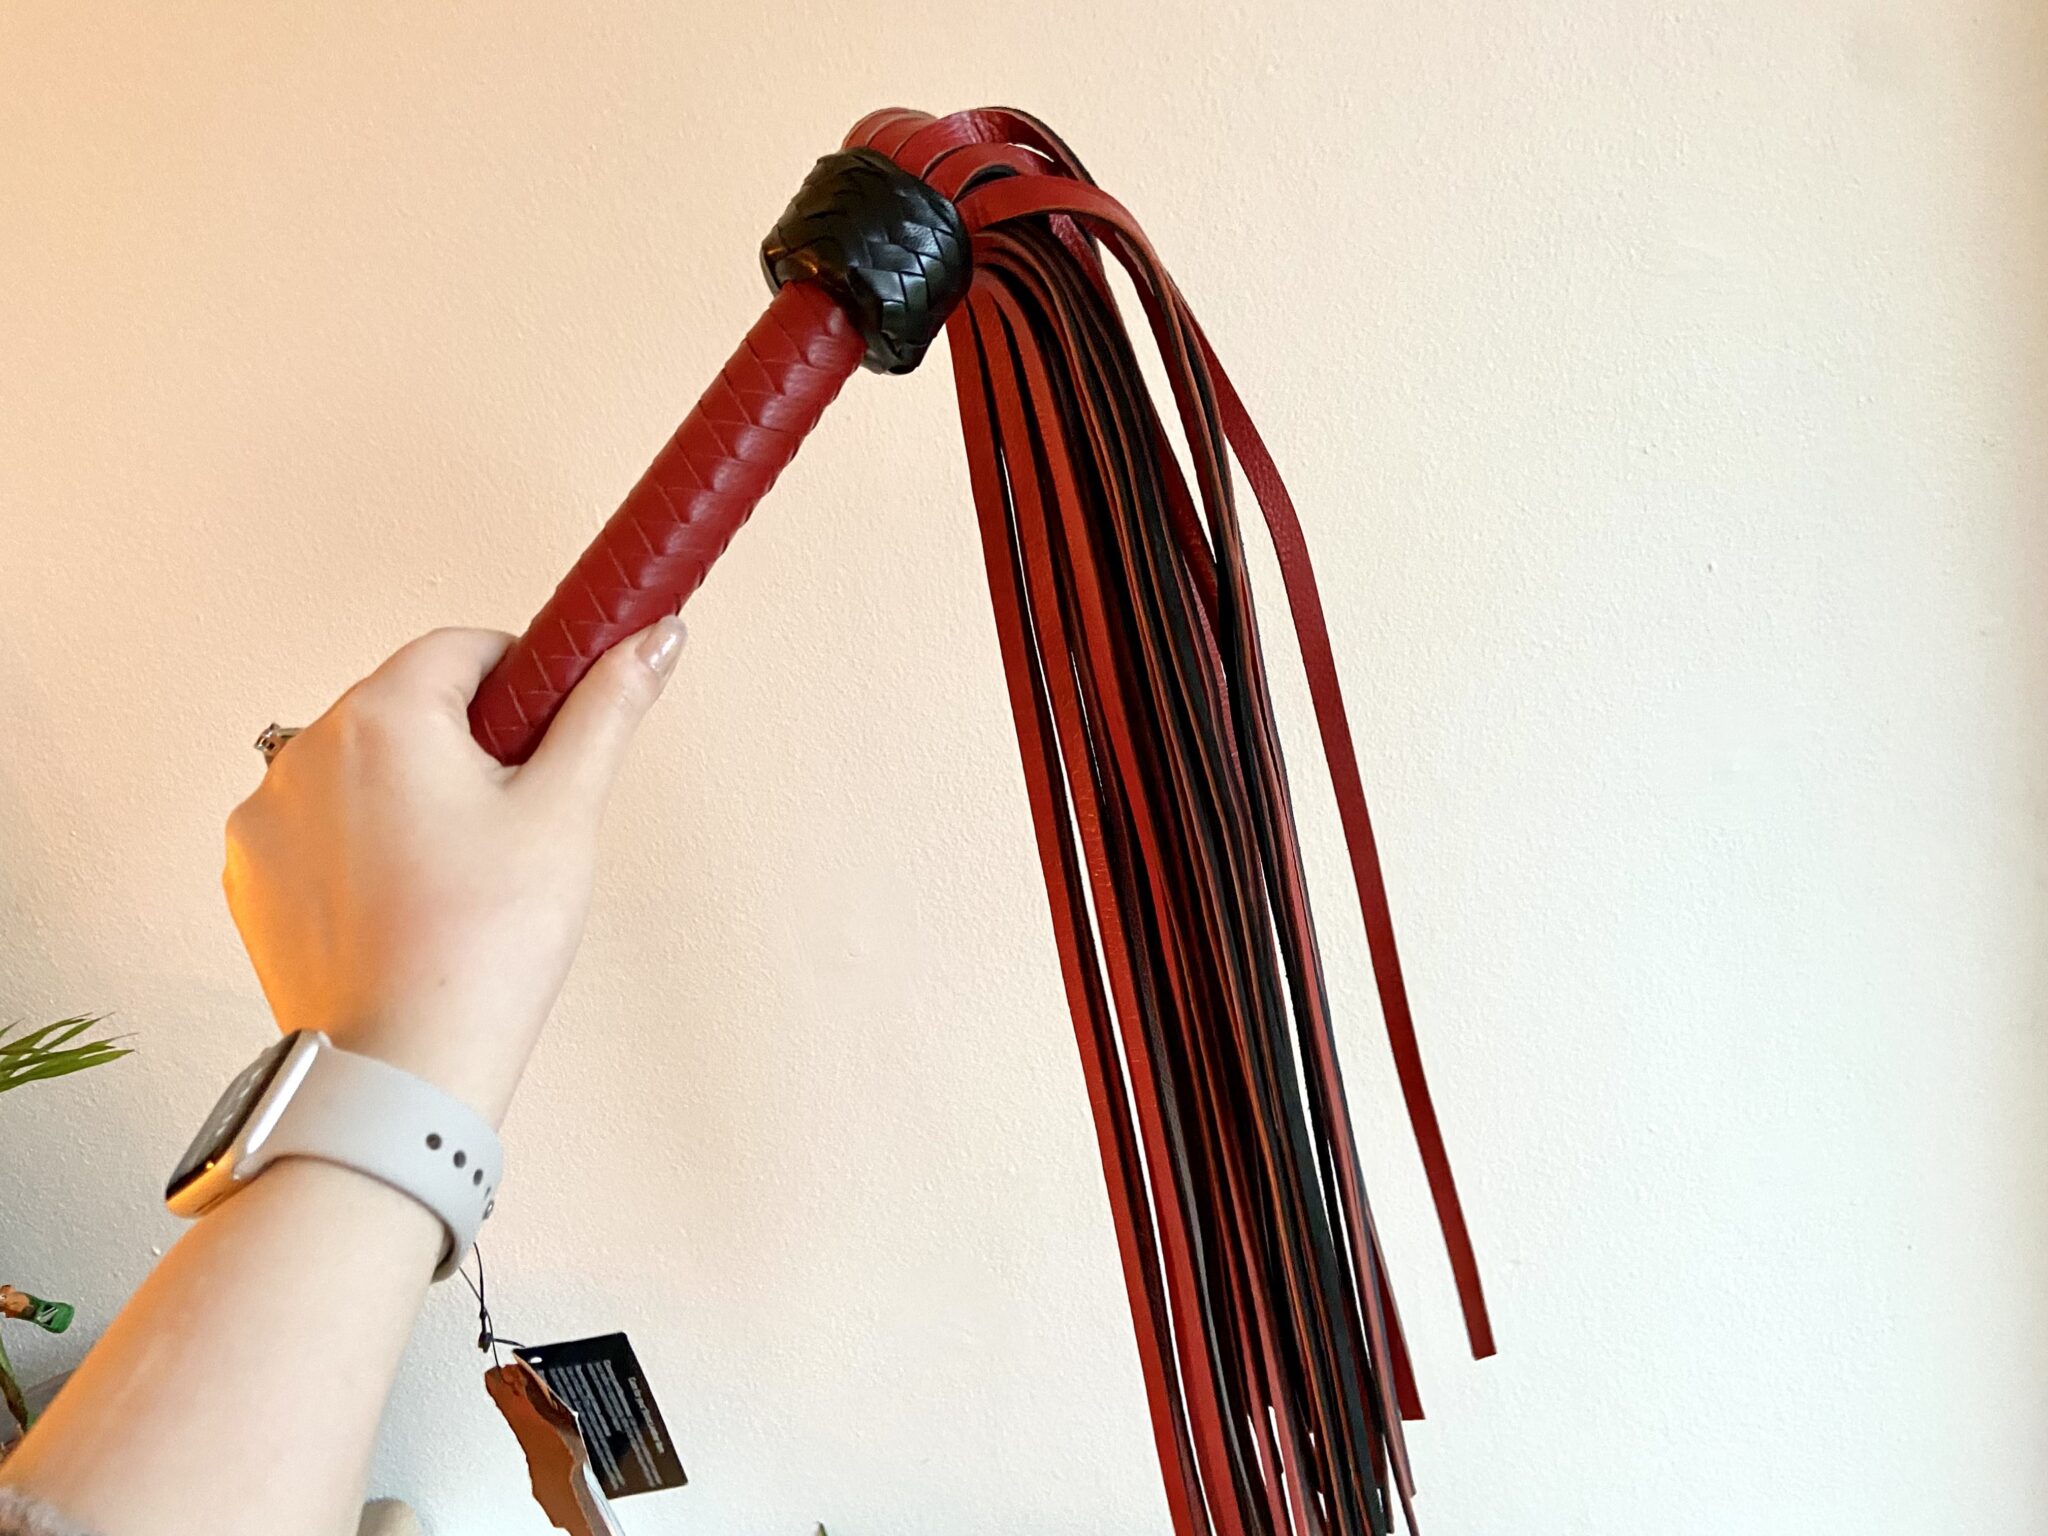 My Personal Experiences with Strict Leather Flogger